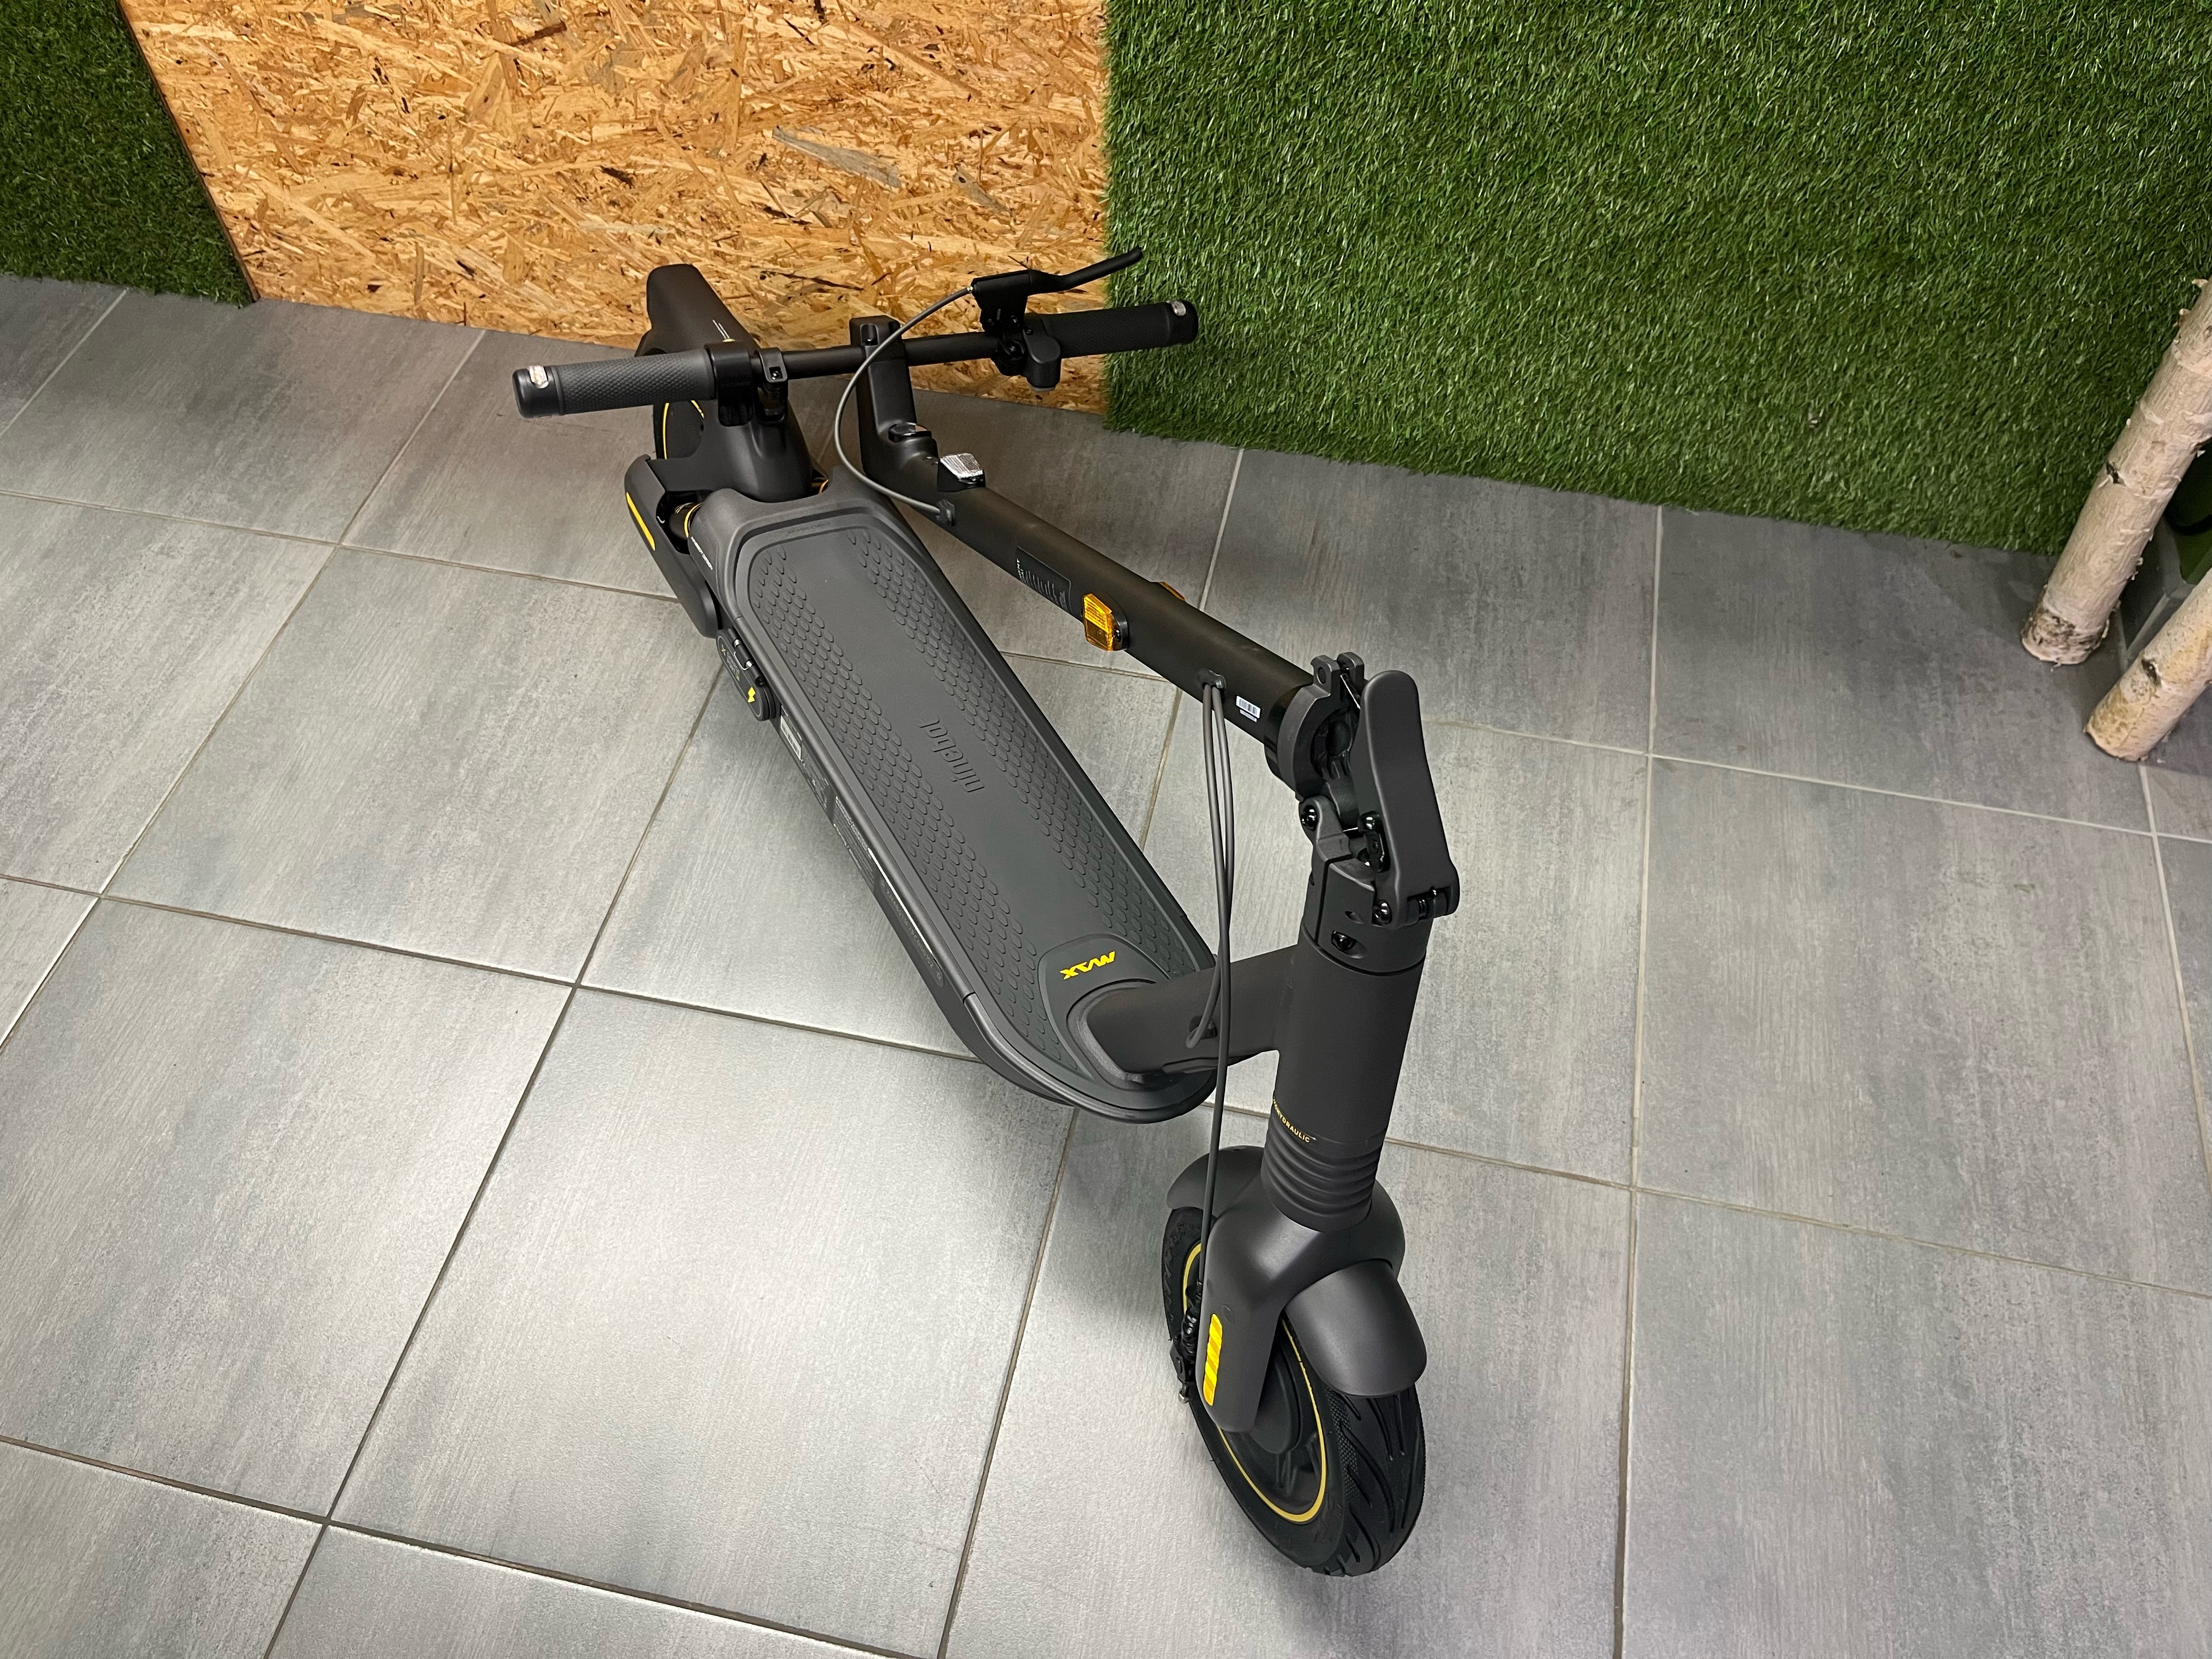 Ninebot Max G2 electric scooter (Official Benelux model) - My Mobelity